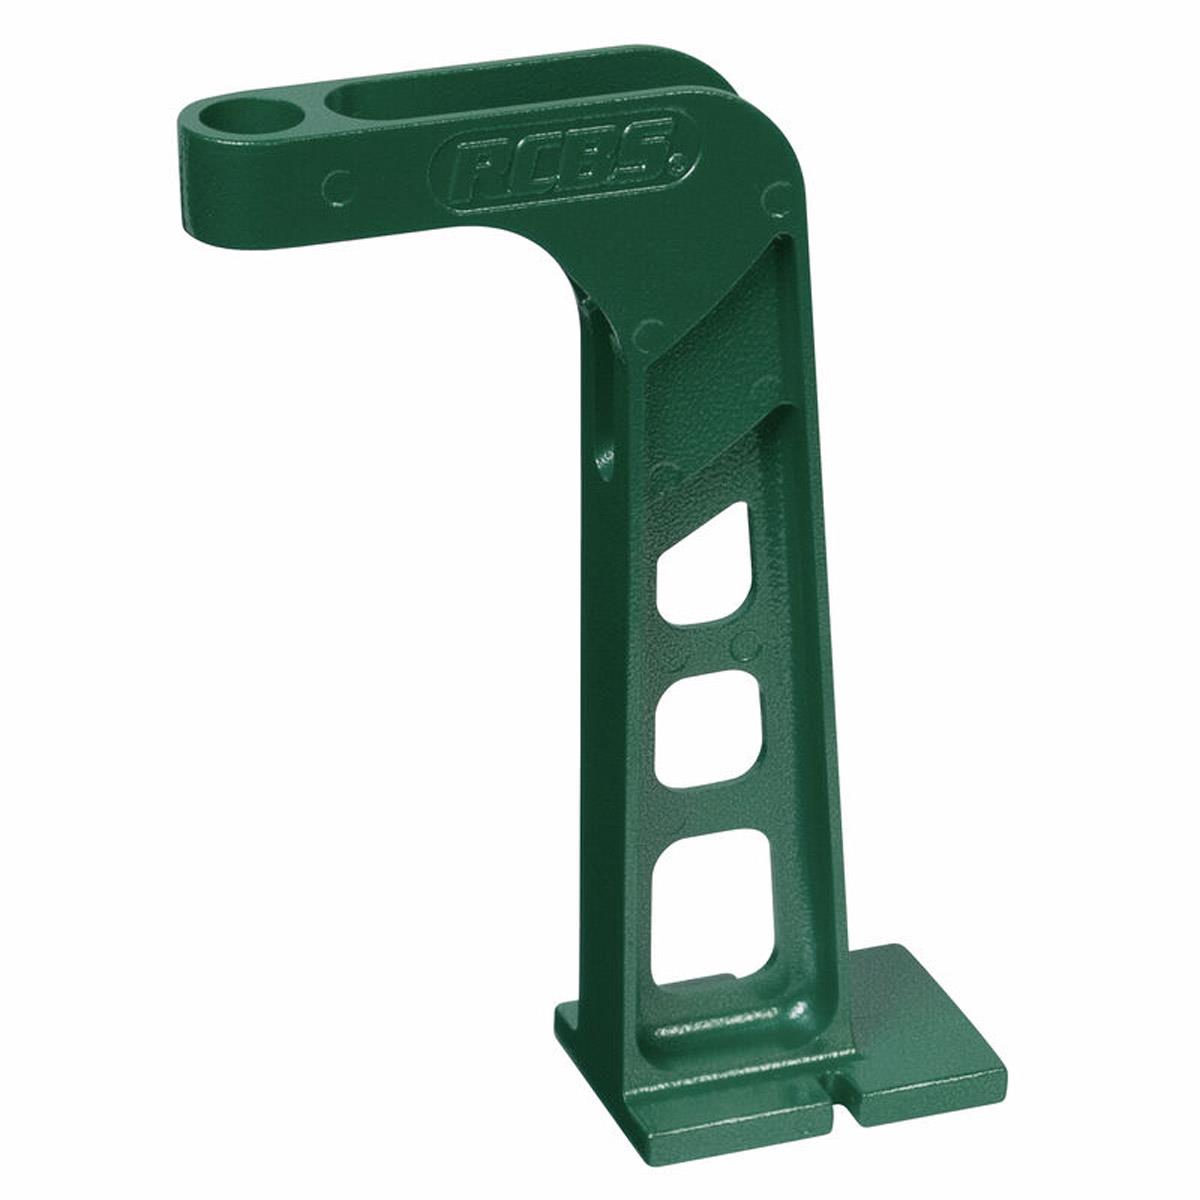 Image of RCBS Advanced Powder Measure Stand